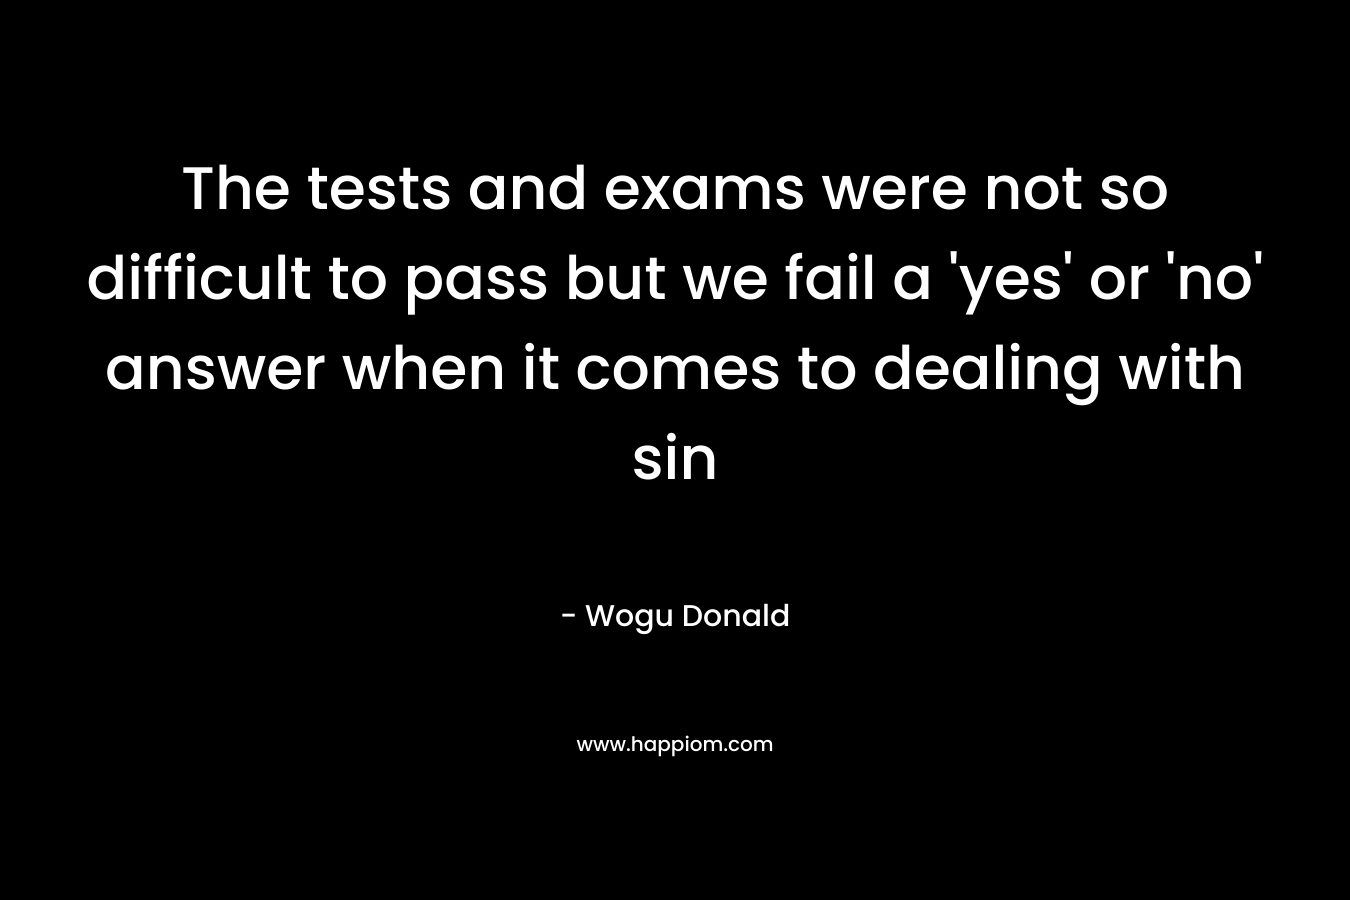 The tests and exams were not so difficult to pass but we fail a 'yes' or 'no' answer when it comes to dealing with sin